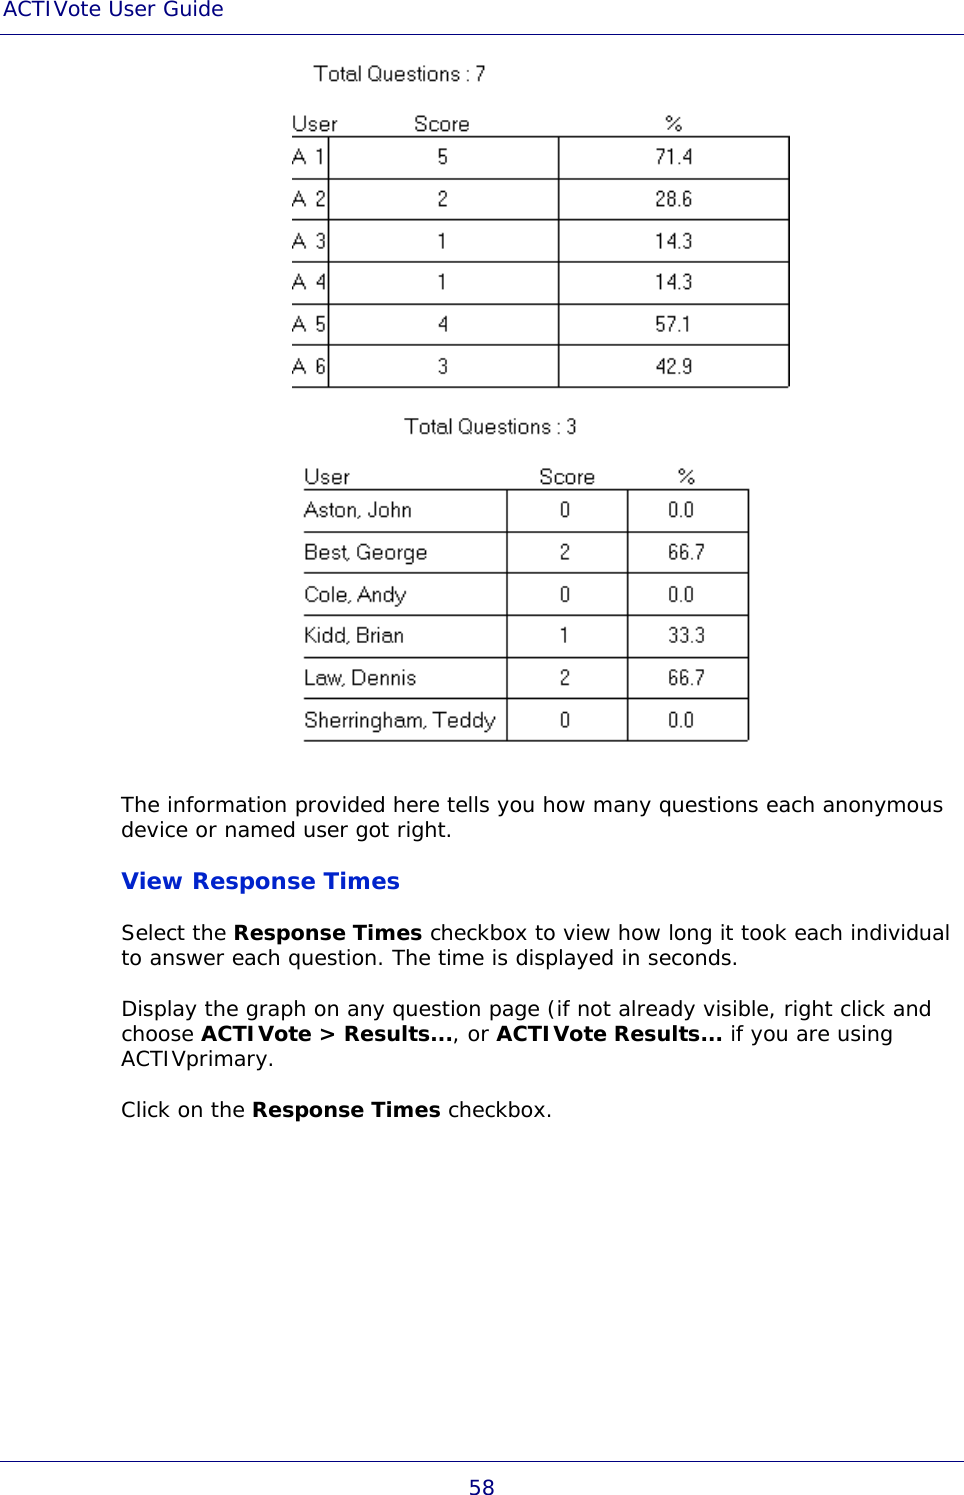 ACTIVote User Guide 58  The information provided here tells you how many questions each anonymous device or named user got right.  View Response Times Select the Response Times checkbox to view how long it took each individual to answer each question. The time is displayed in seconds. Display the graph on any question page (if not already visible, right click and choose ACTIVote &gt; Results..., or ACTIVote Results... if you are using ACTIVprimary. Click on the Response Times checkbox. 